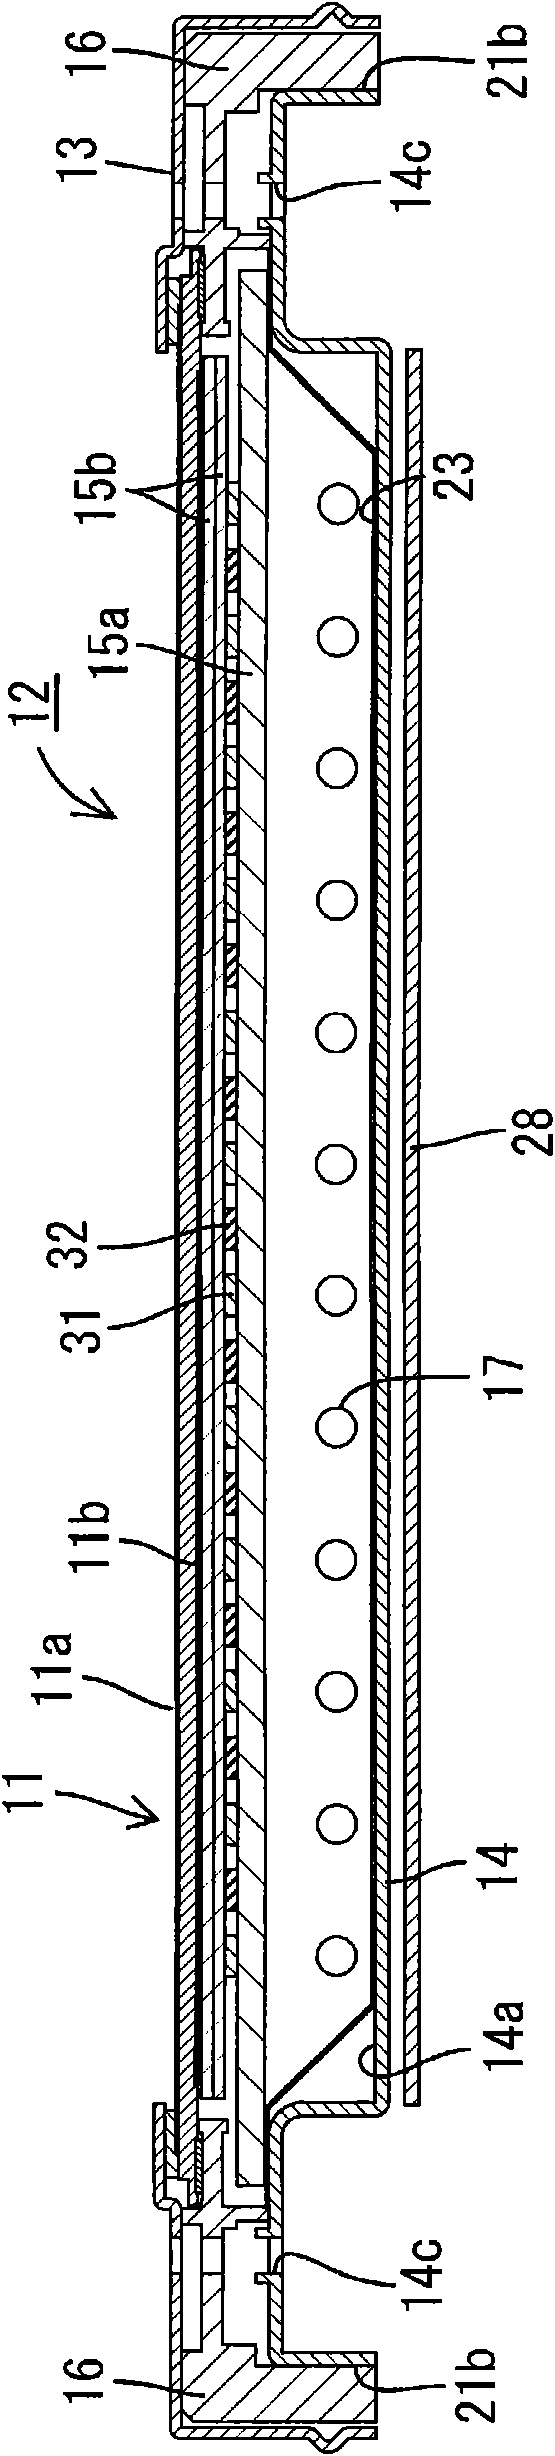 Lighting device, display device, and television receiving device